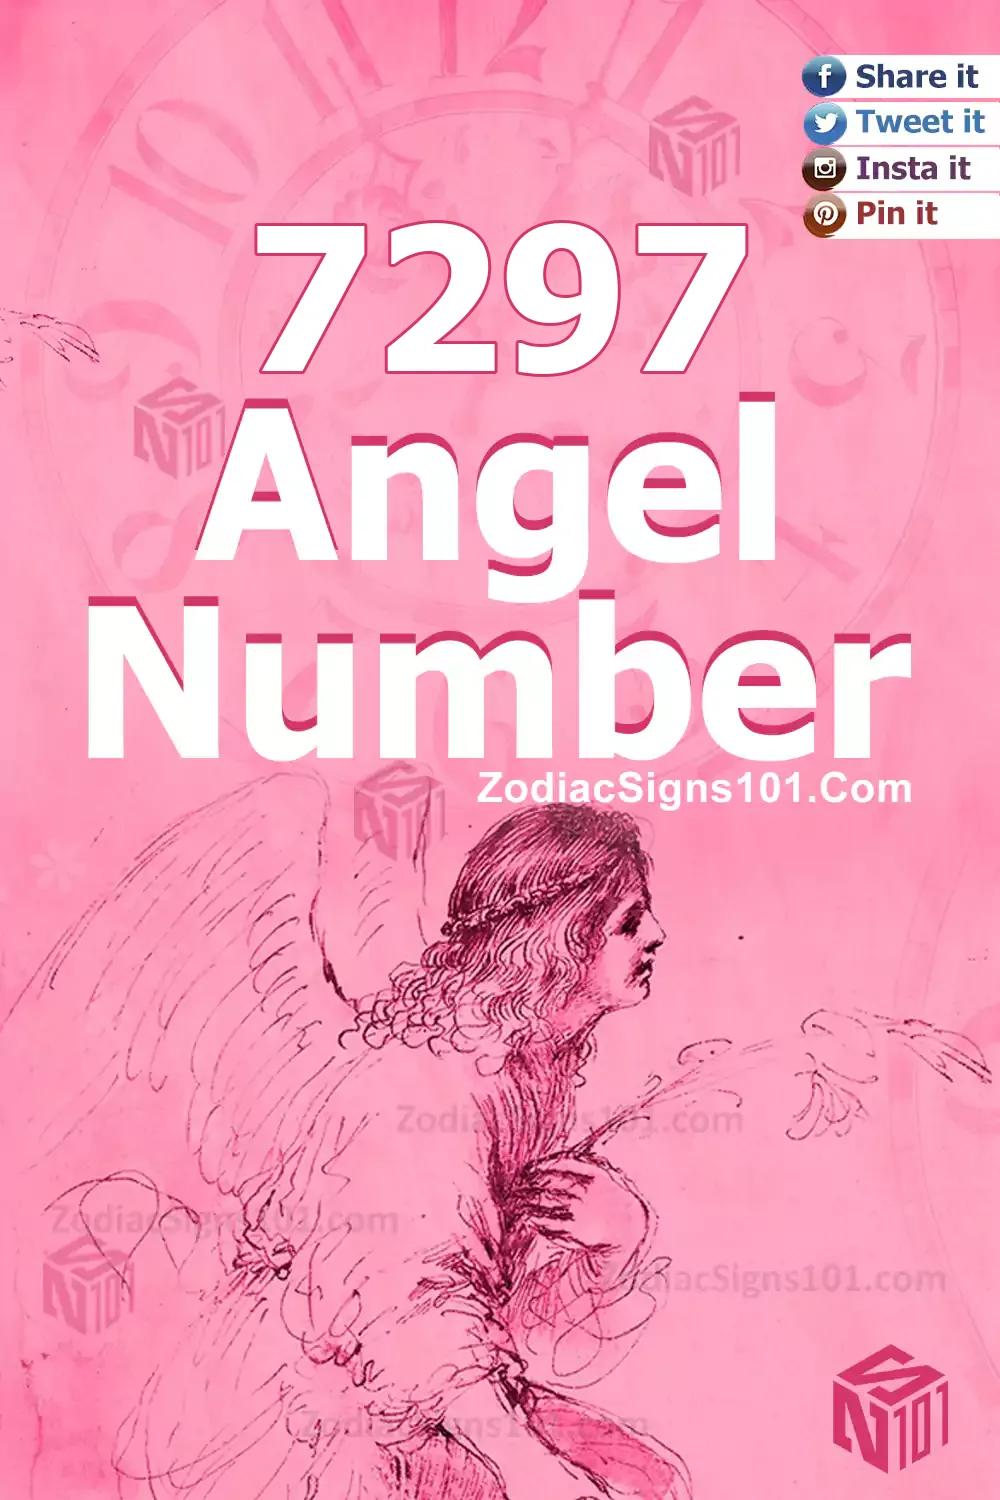 7297 Angel Number Meaning